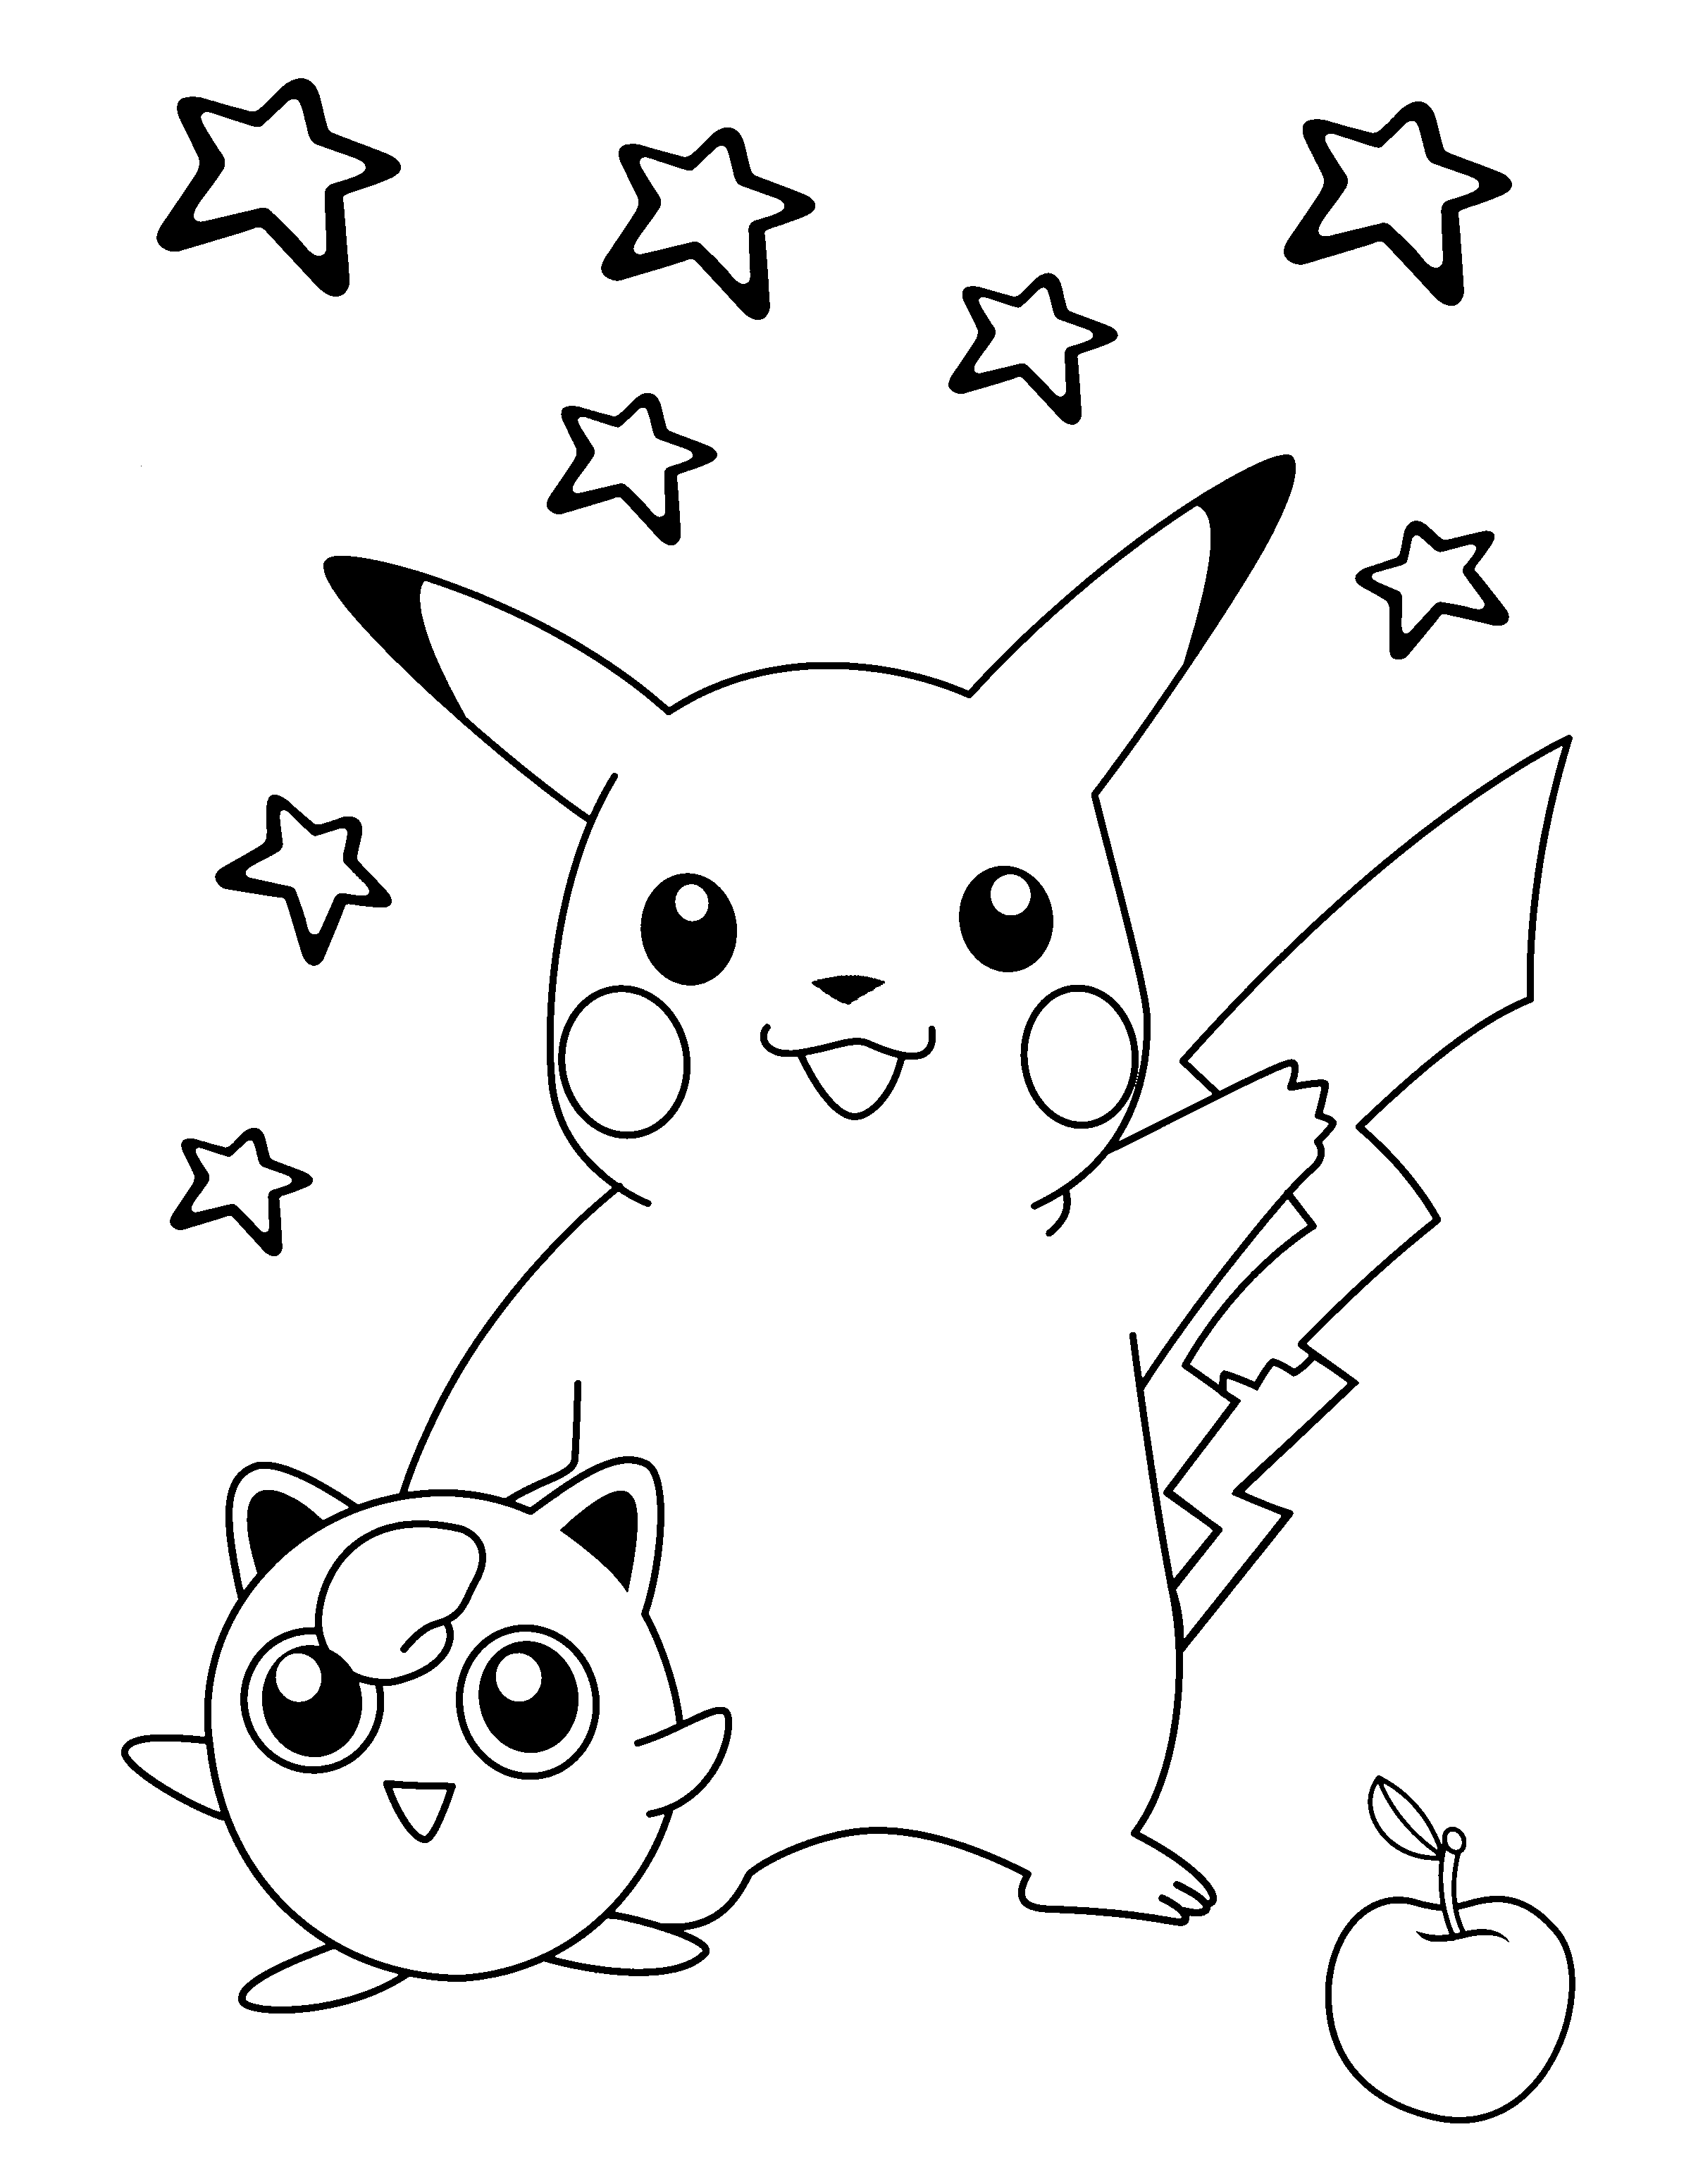 Pokemon to download for free - All Pokemon coloring pages ...